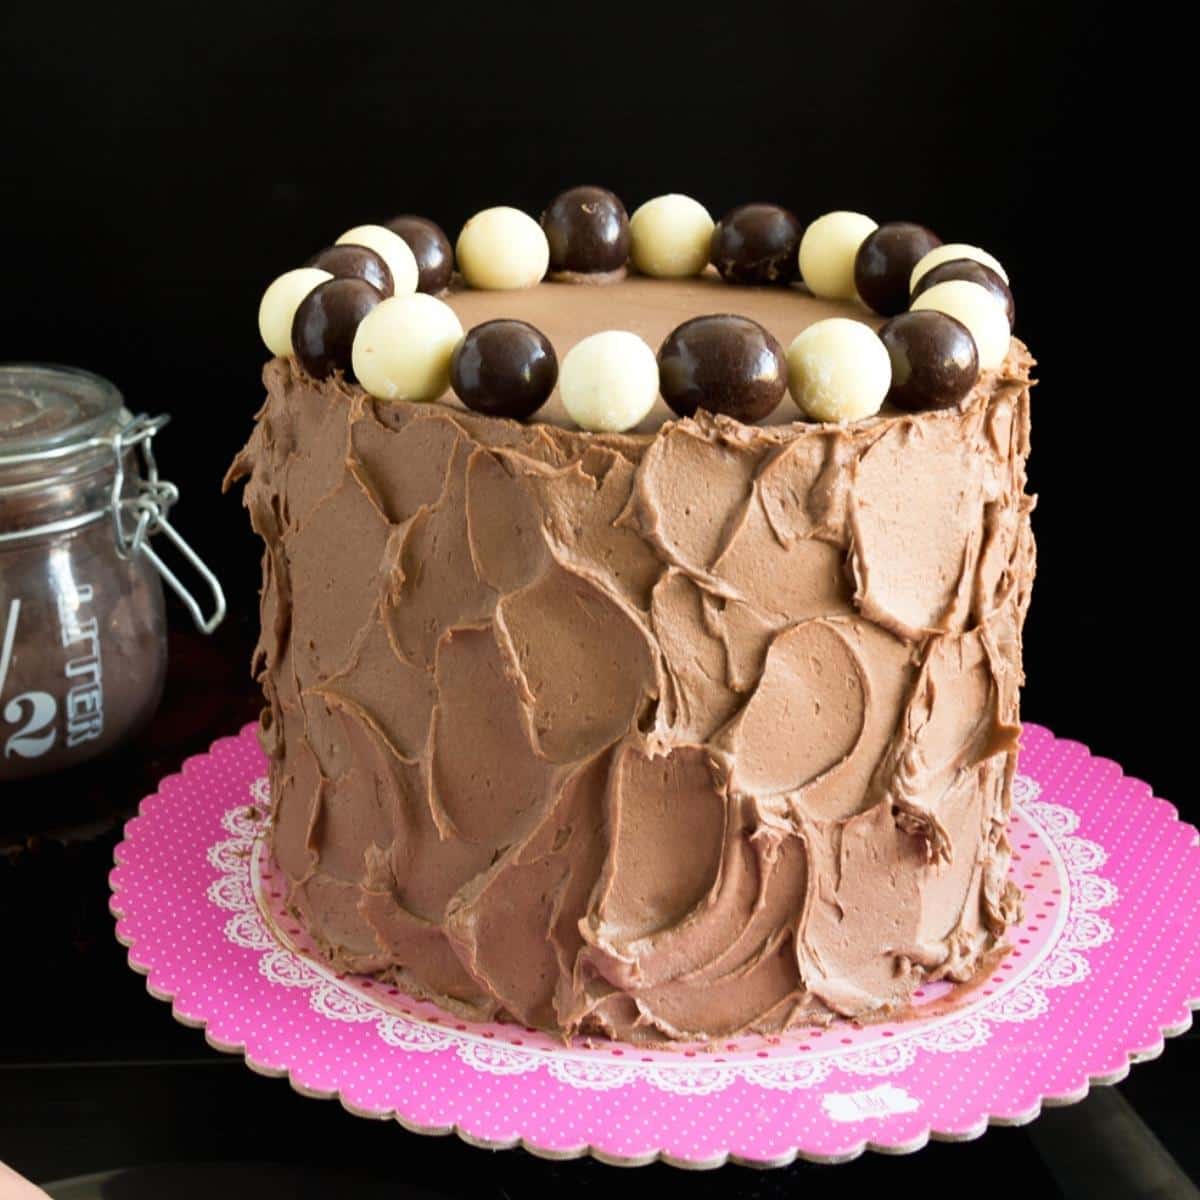 A vanilla cake with chocolate frosting.